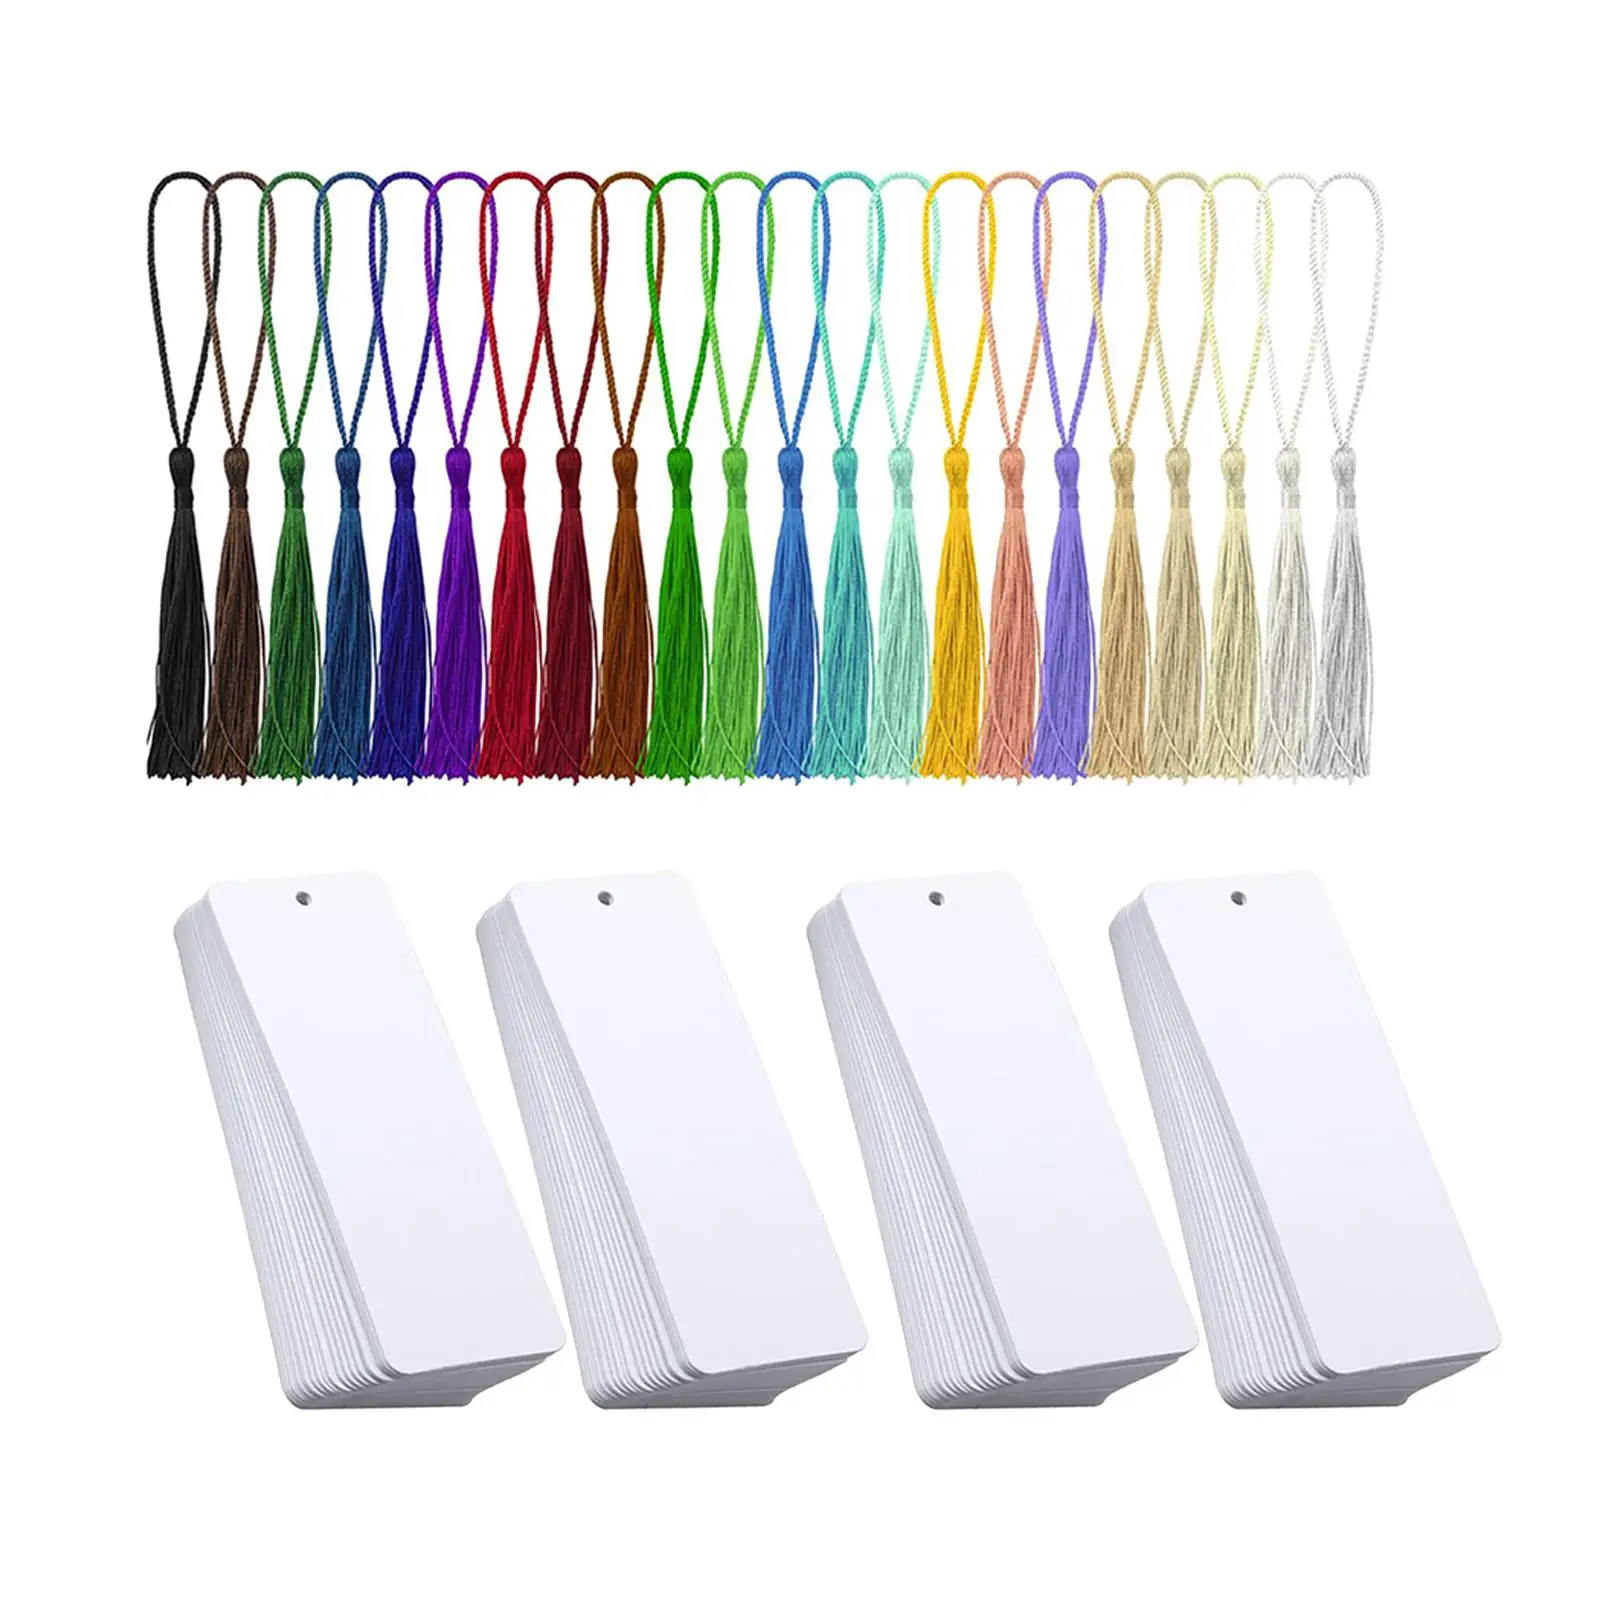 80 Pieces Blank White Bookmarks with Tassels Durable Cardstock Bookmarks for School Supply DIY Art Projects Hanging Ornament